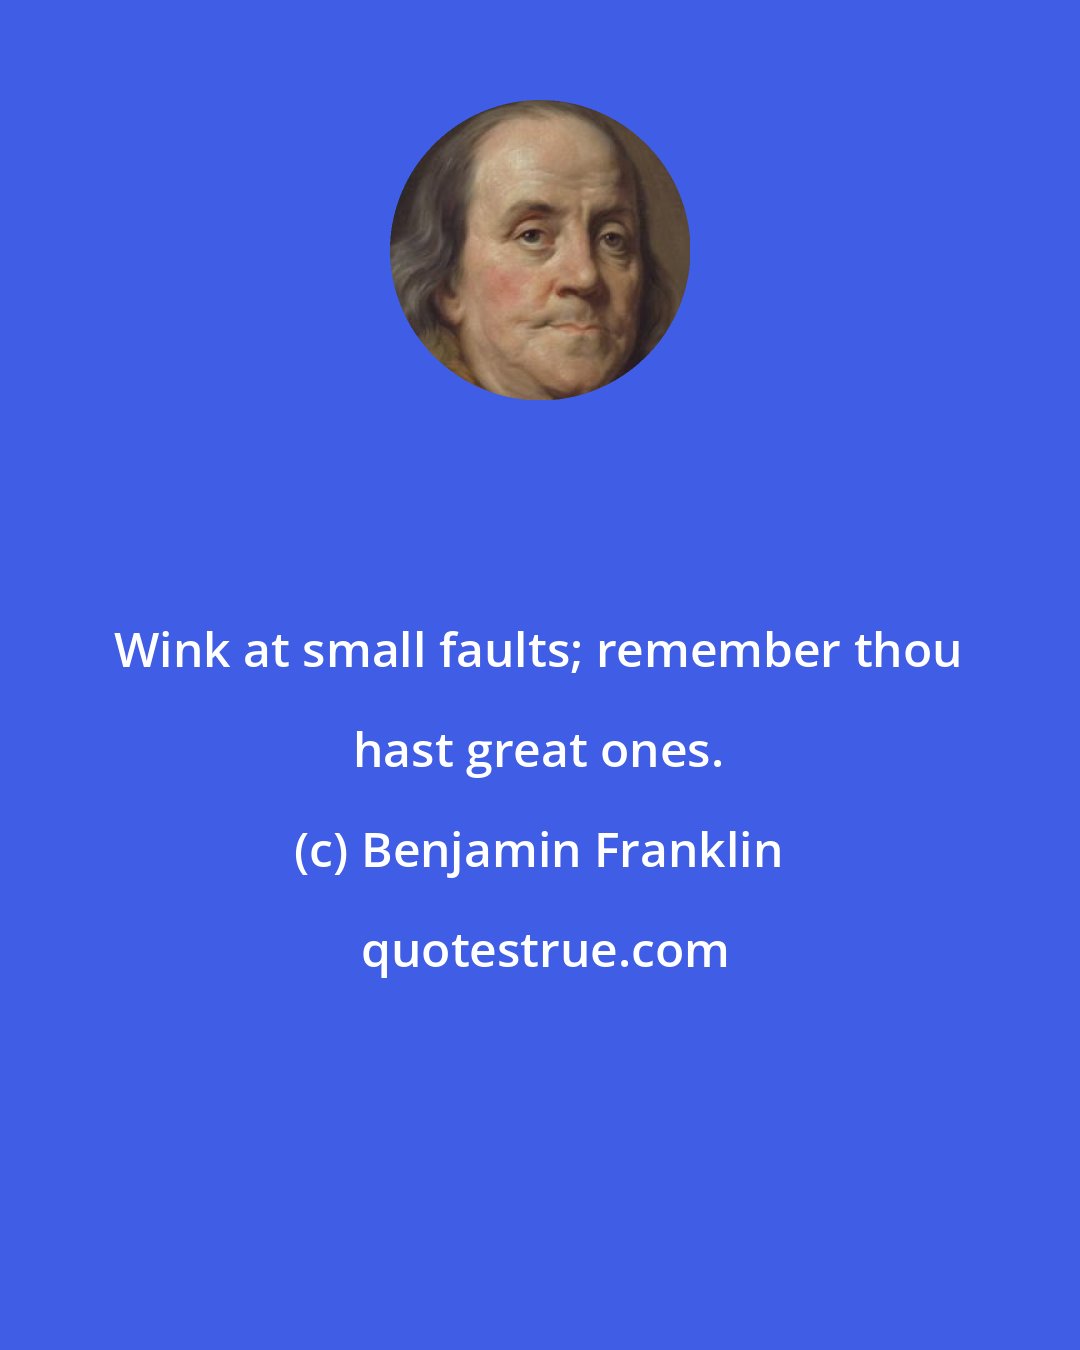 Benjamin Franklin: Wink at small faults; remember thou hast great ones.